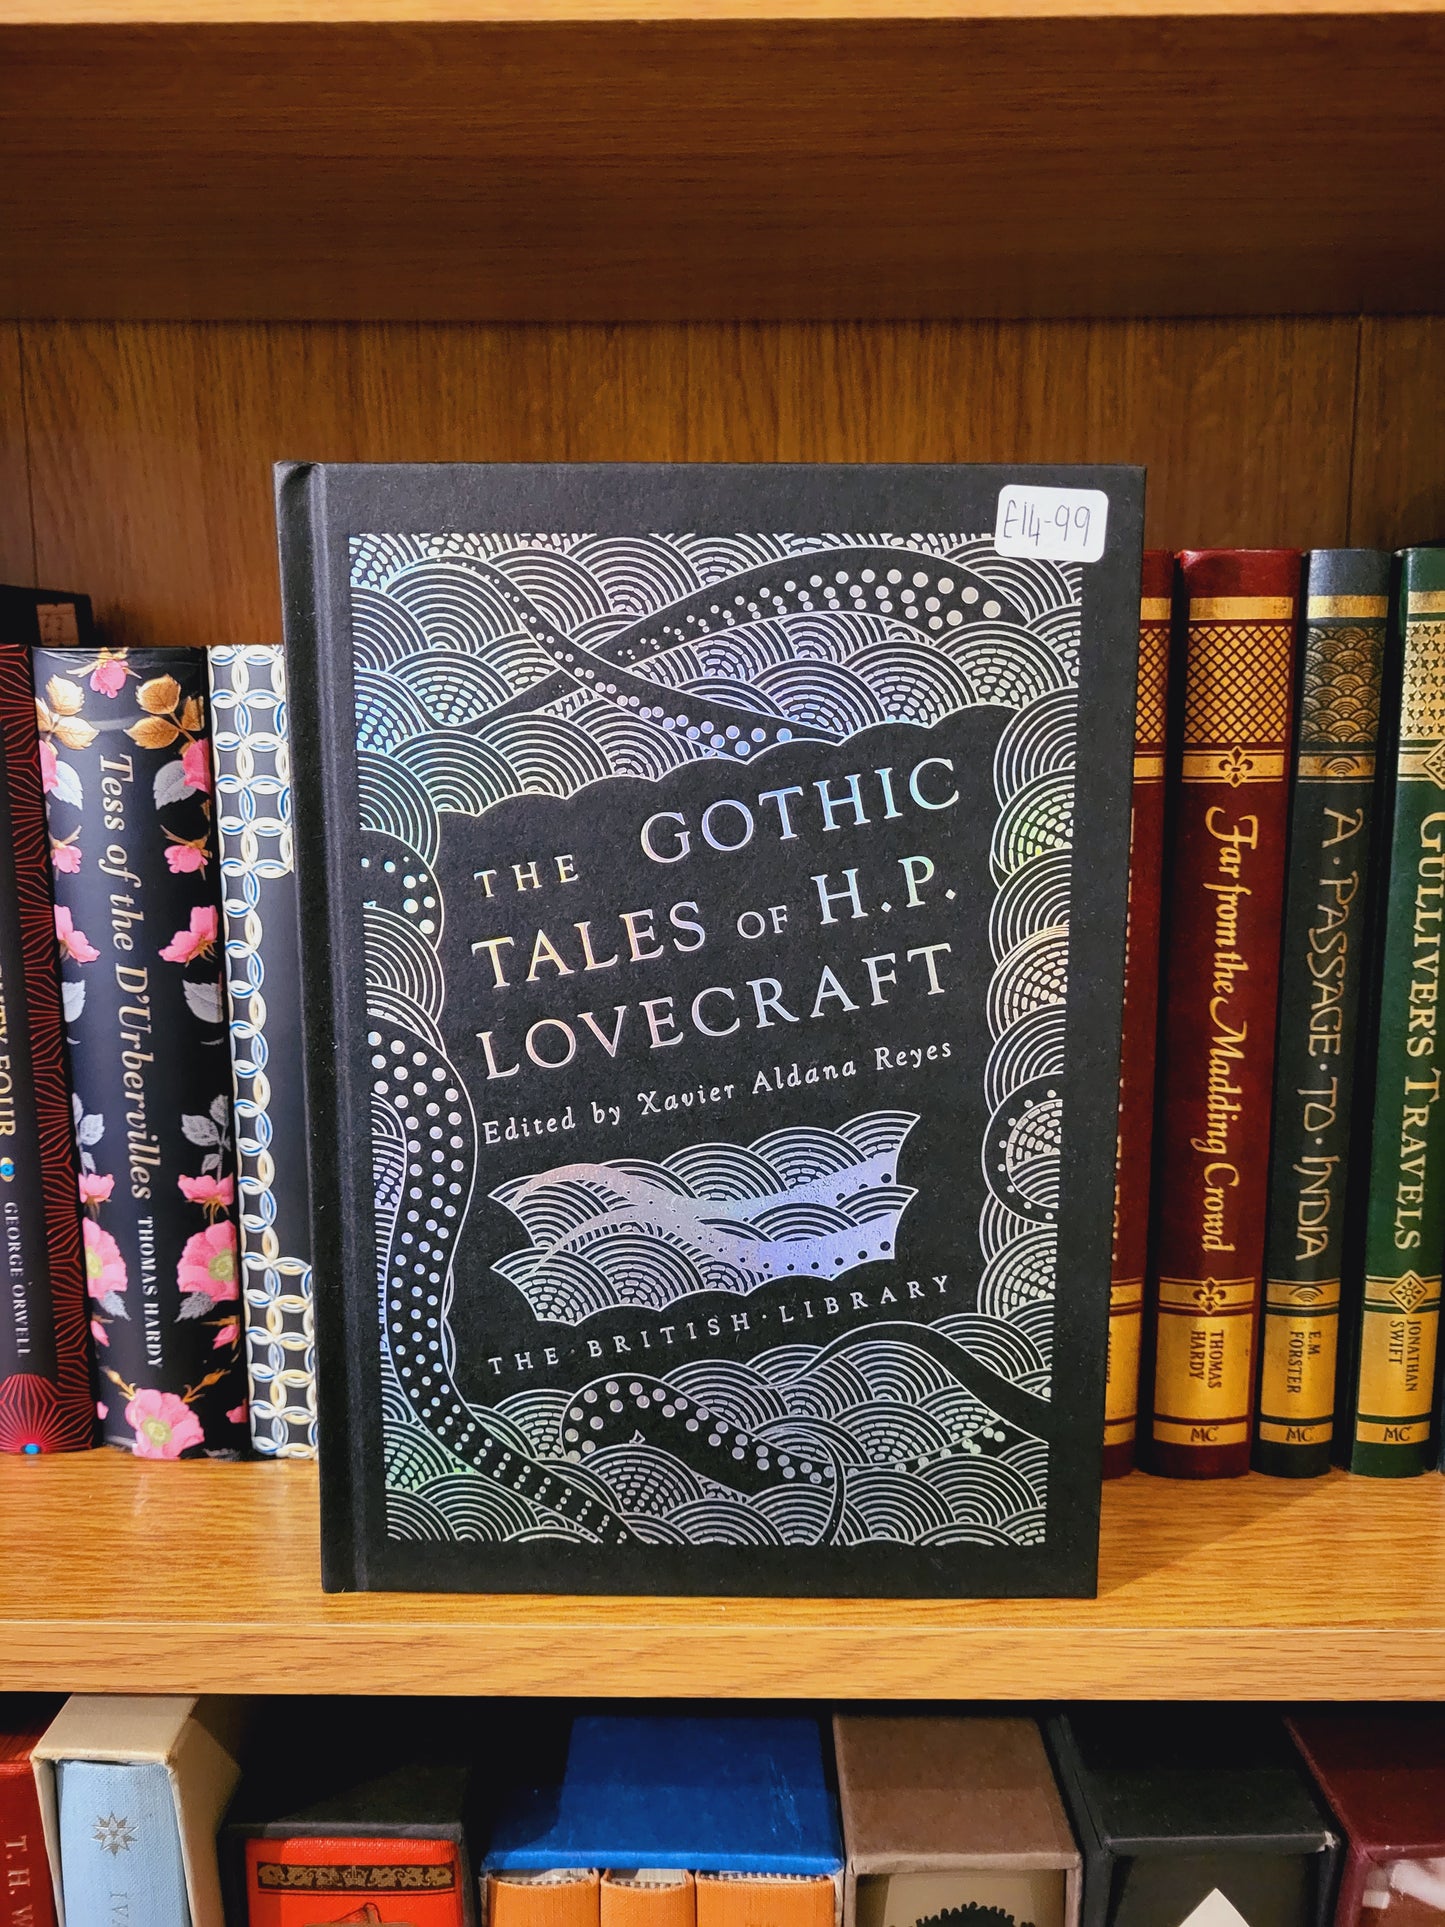 The Gothic Tales of H.P Lovecraft - Edited by Xavier Aldana Reyes